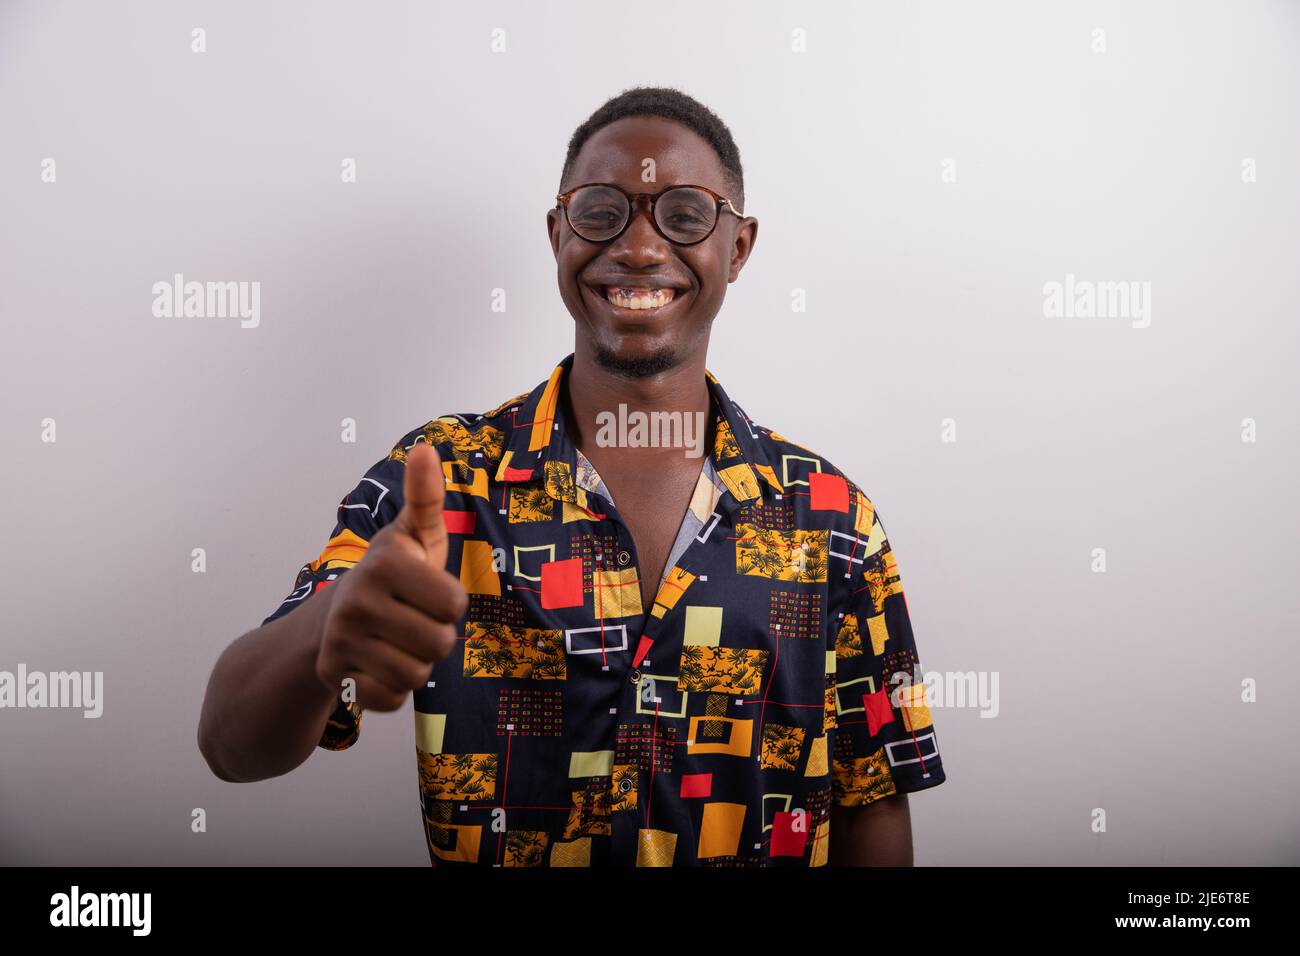 Happy smiling boy in photo studio raises thumb in victory sign. Thumb up. Stock Photo